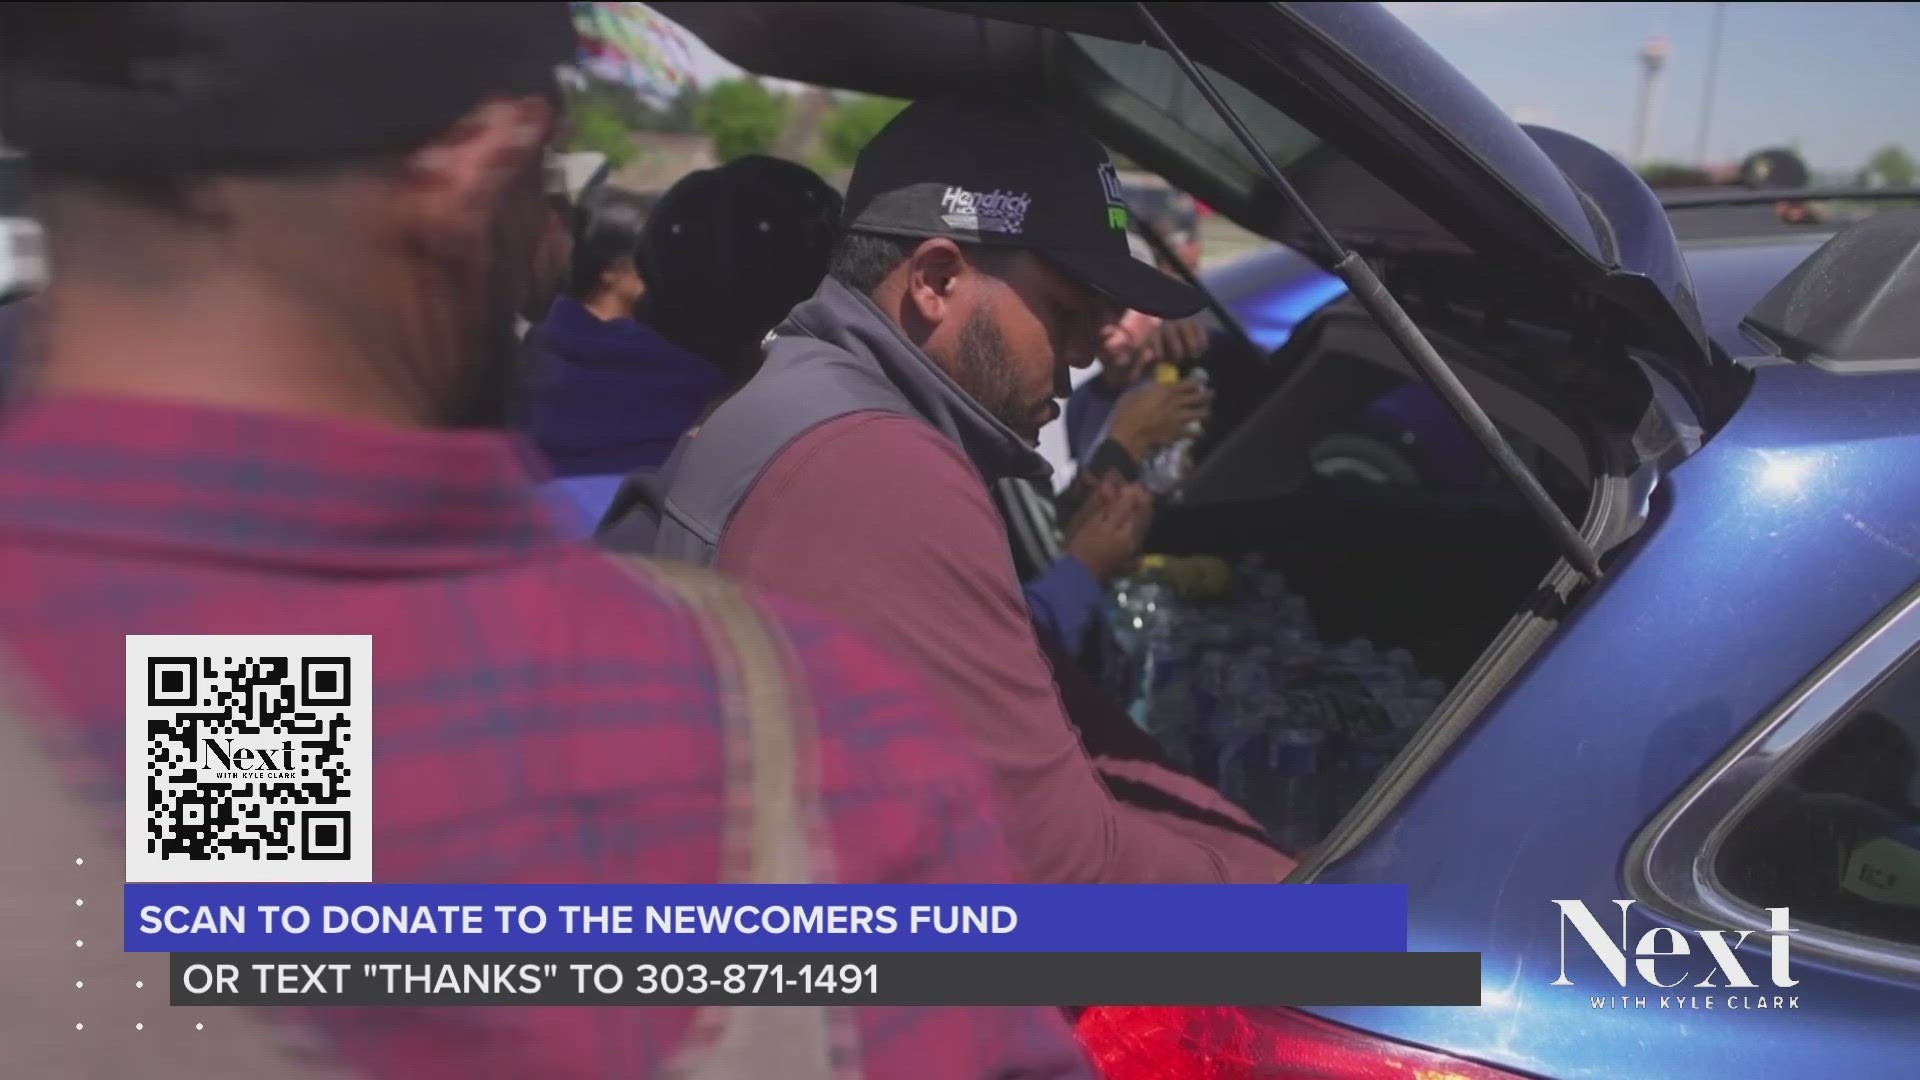 The Newcomer Fund is run by the Rose Community Foundation, which looks for and funds the best non-profits helping migrants in Denver.